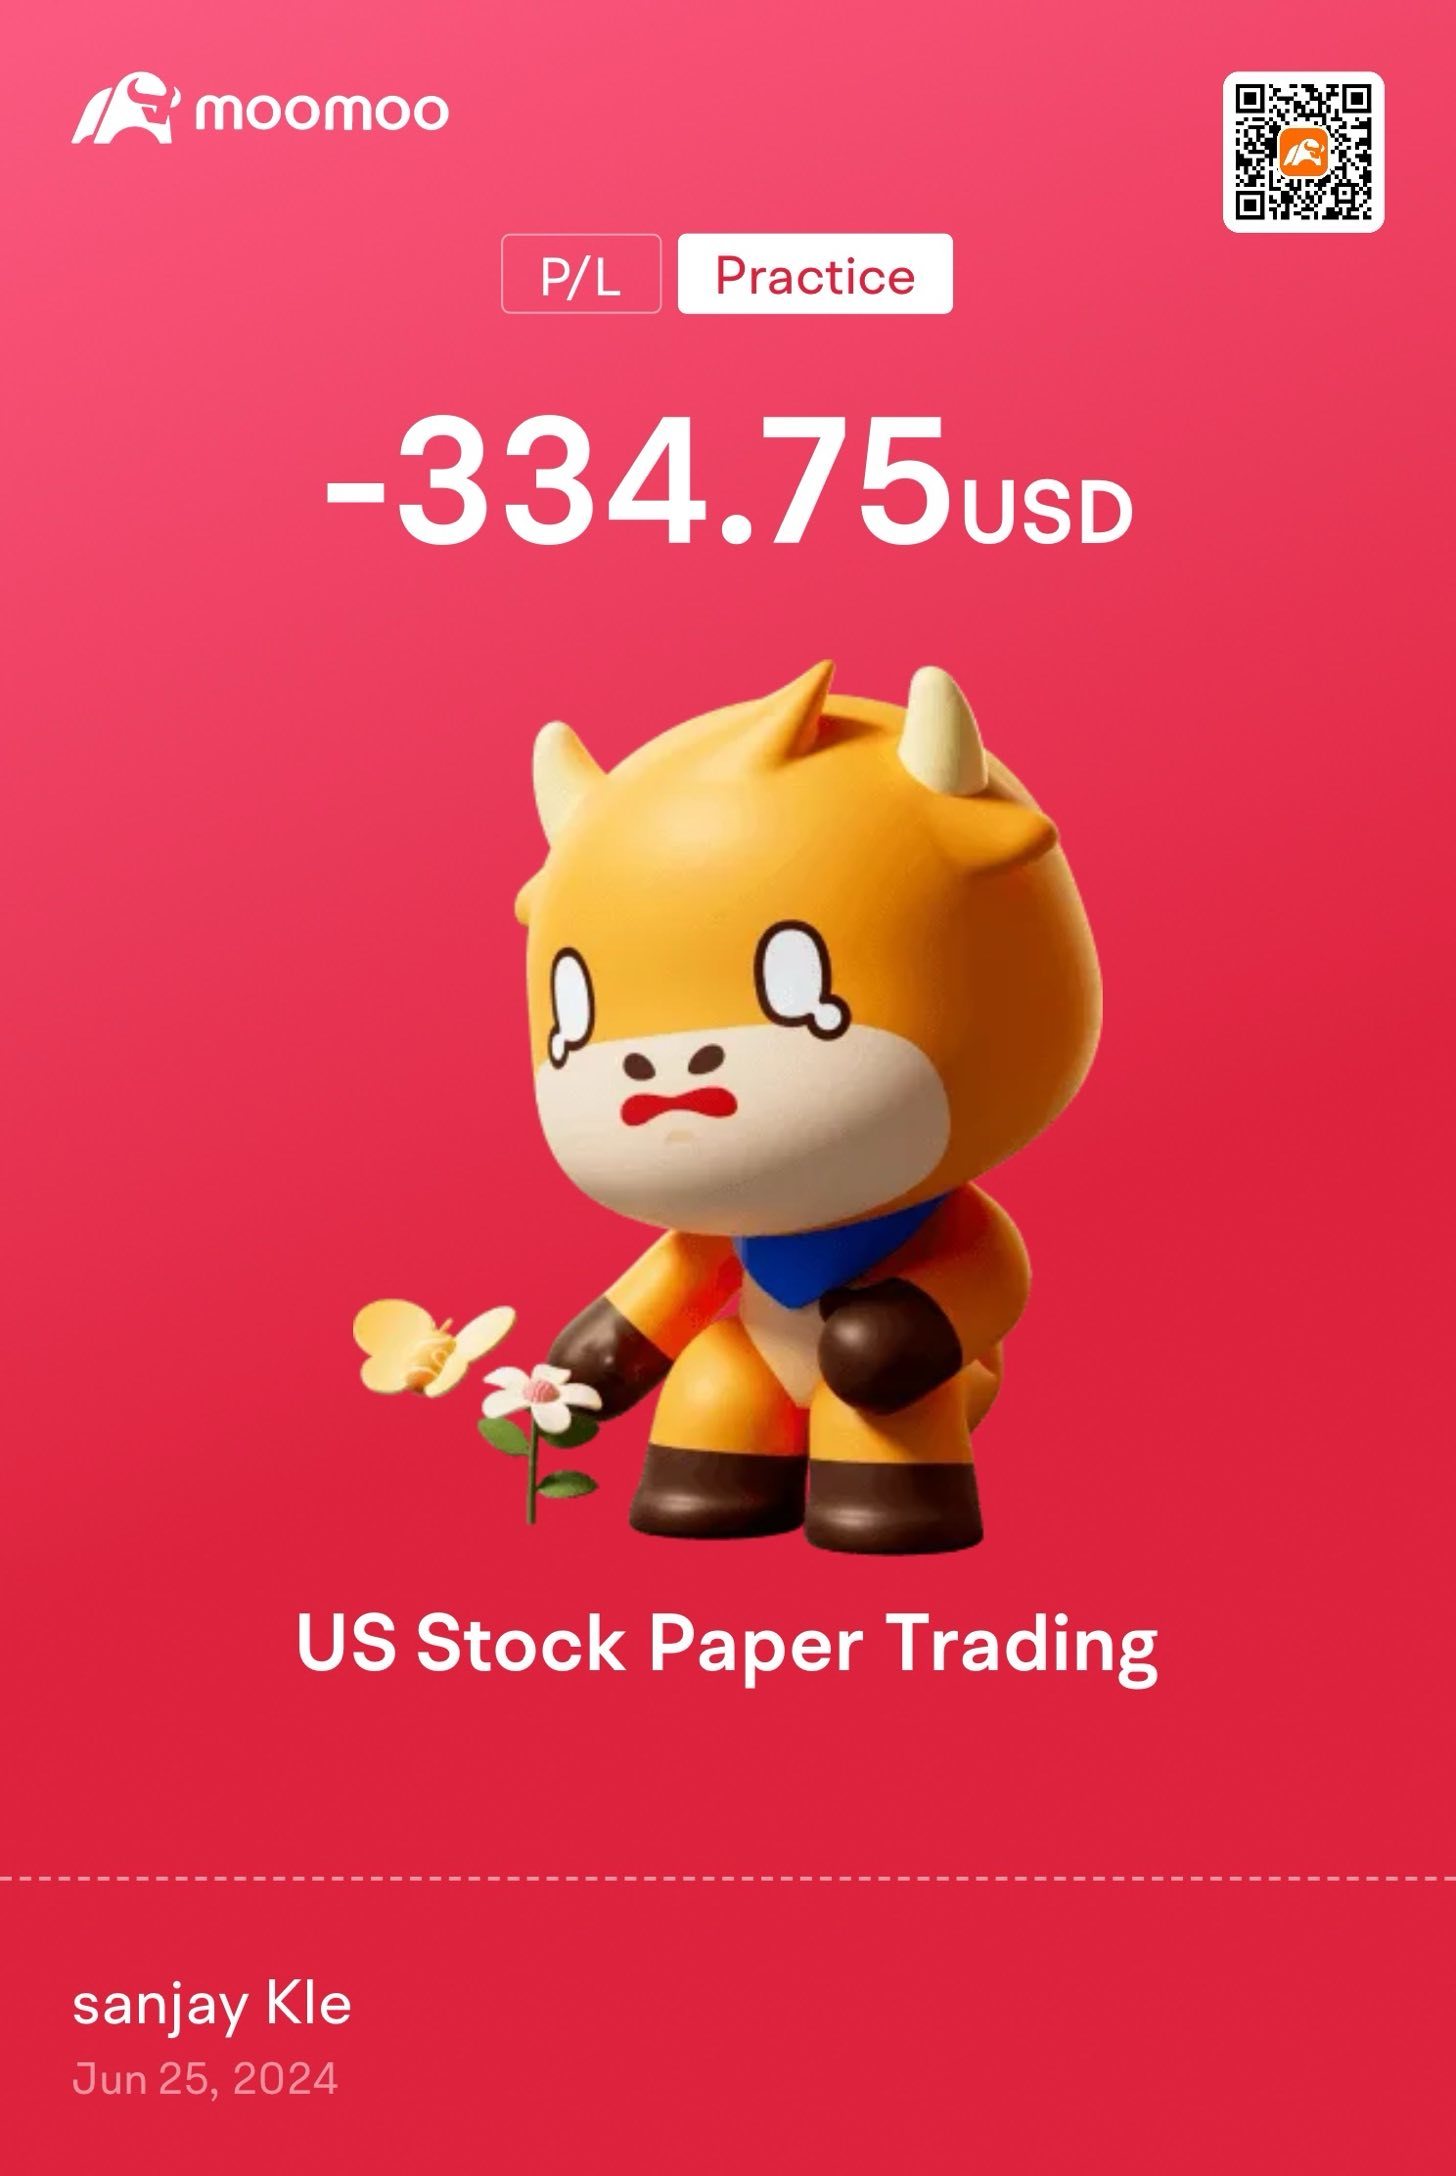 Paper trading